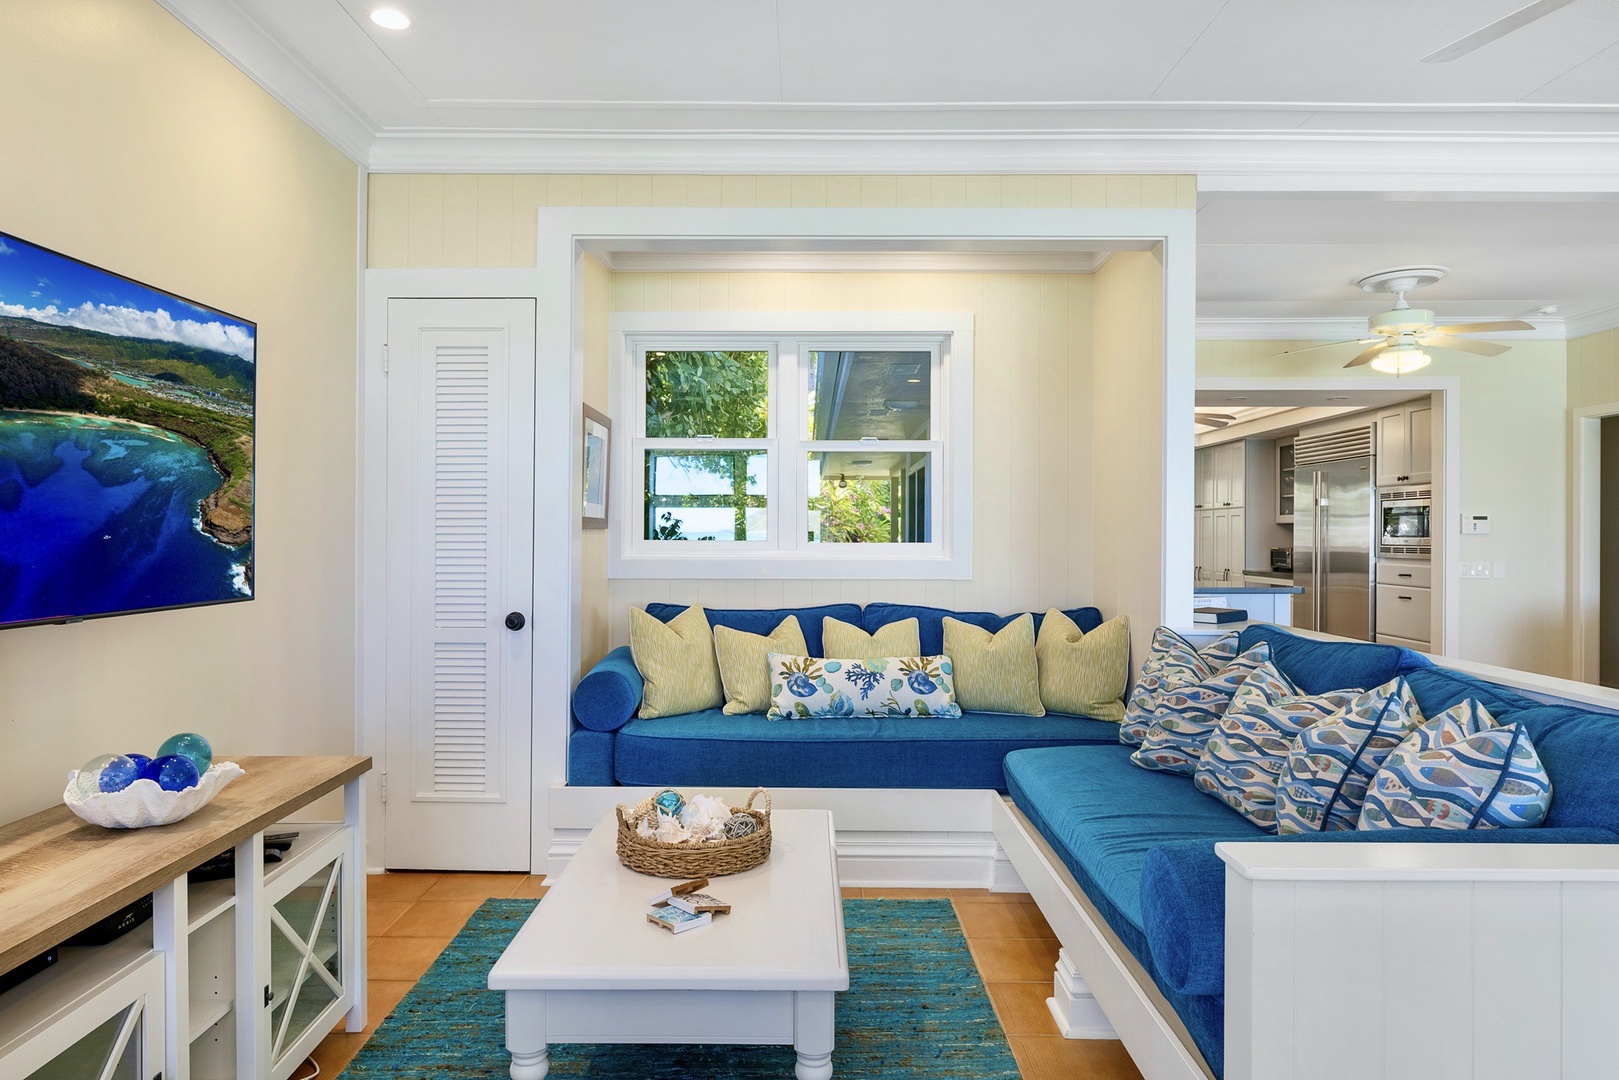 Kailua Vacation Rentals, Lanikai Seashore - There's ample seating in the TV room for all to enjoy